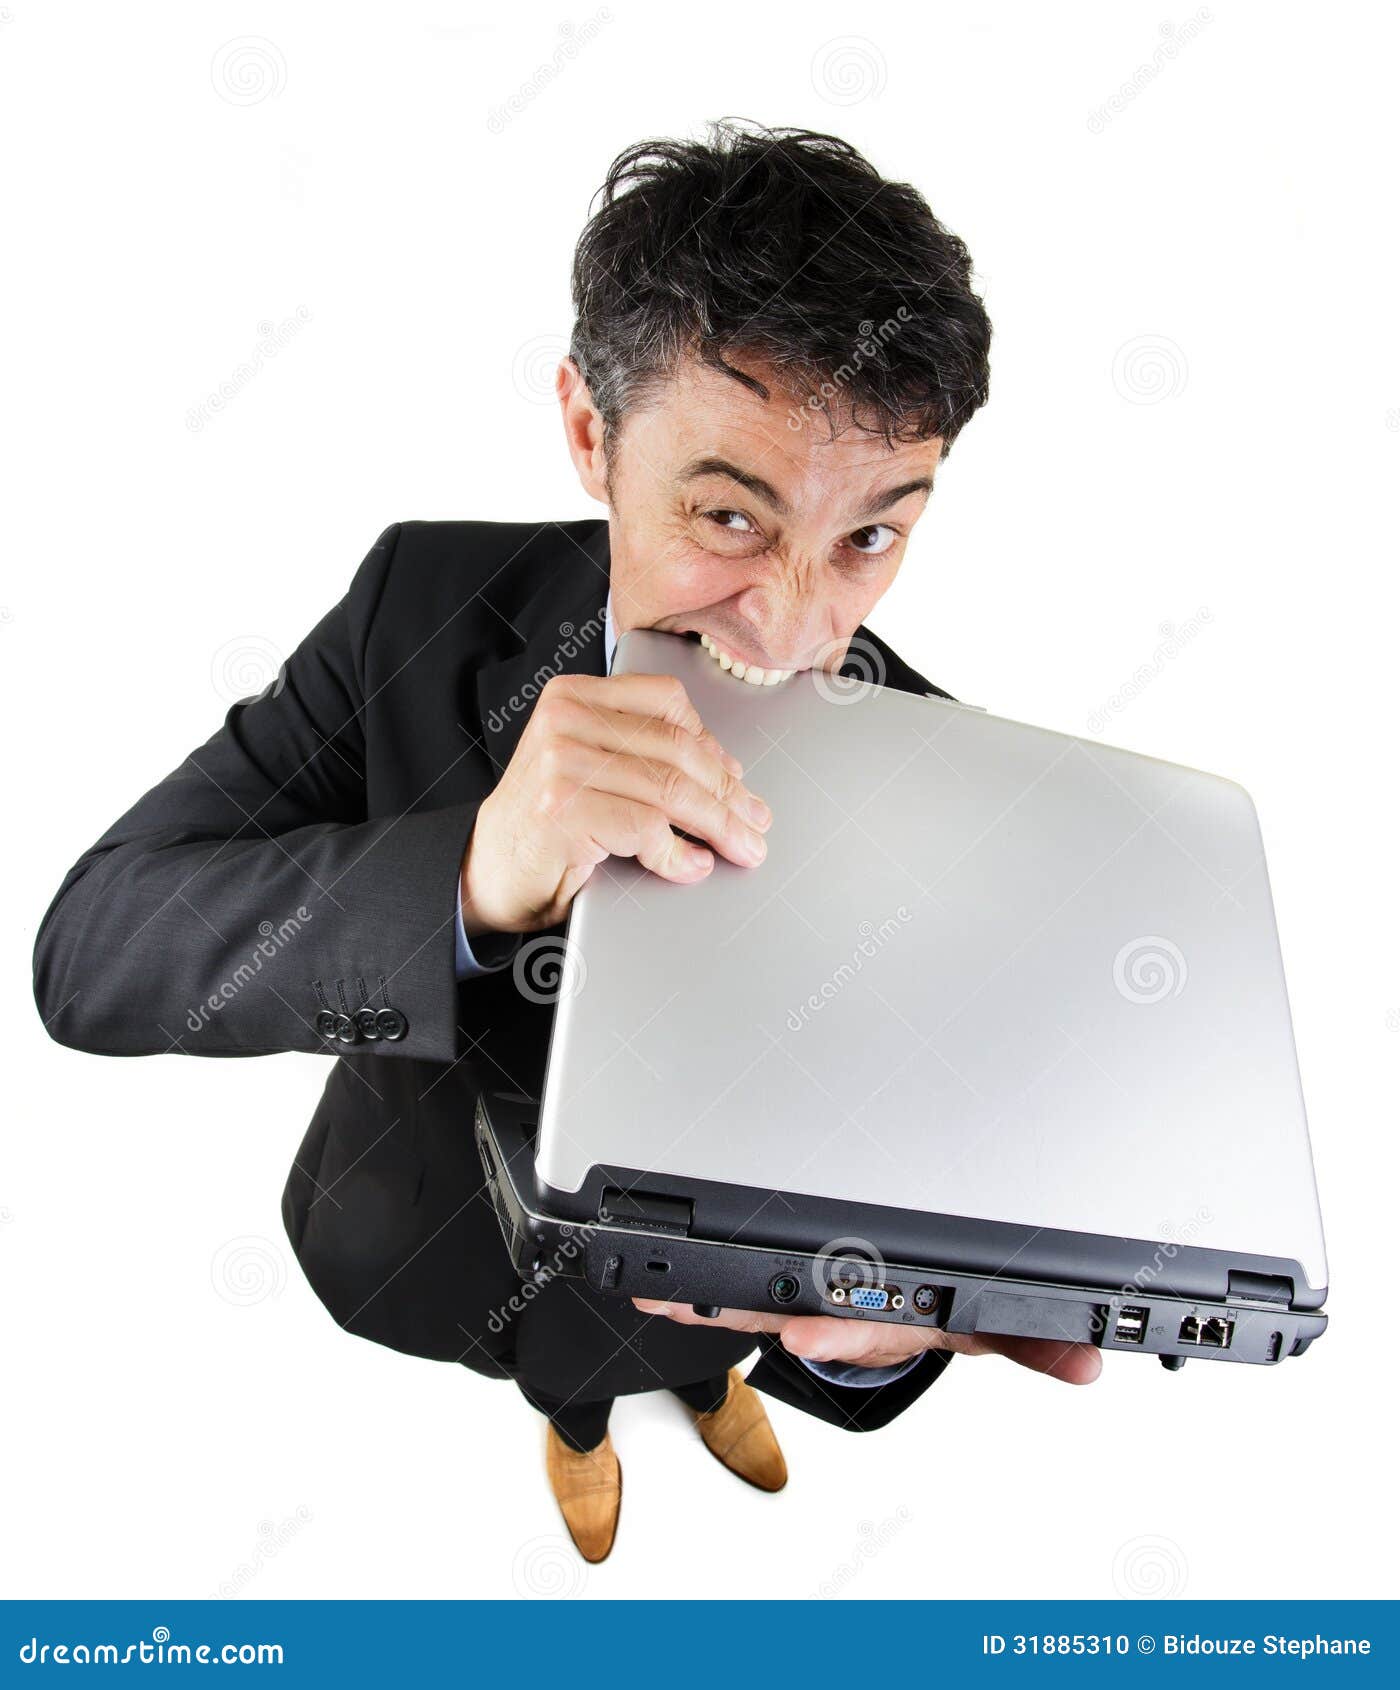 frustrated-businessman-biting-his-humorous-high-angle-full-length-portrait-laptop-computer-desperation-isolated-white-31885310.jpg